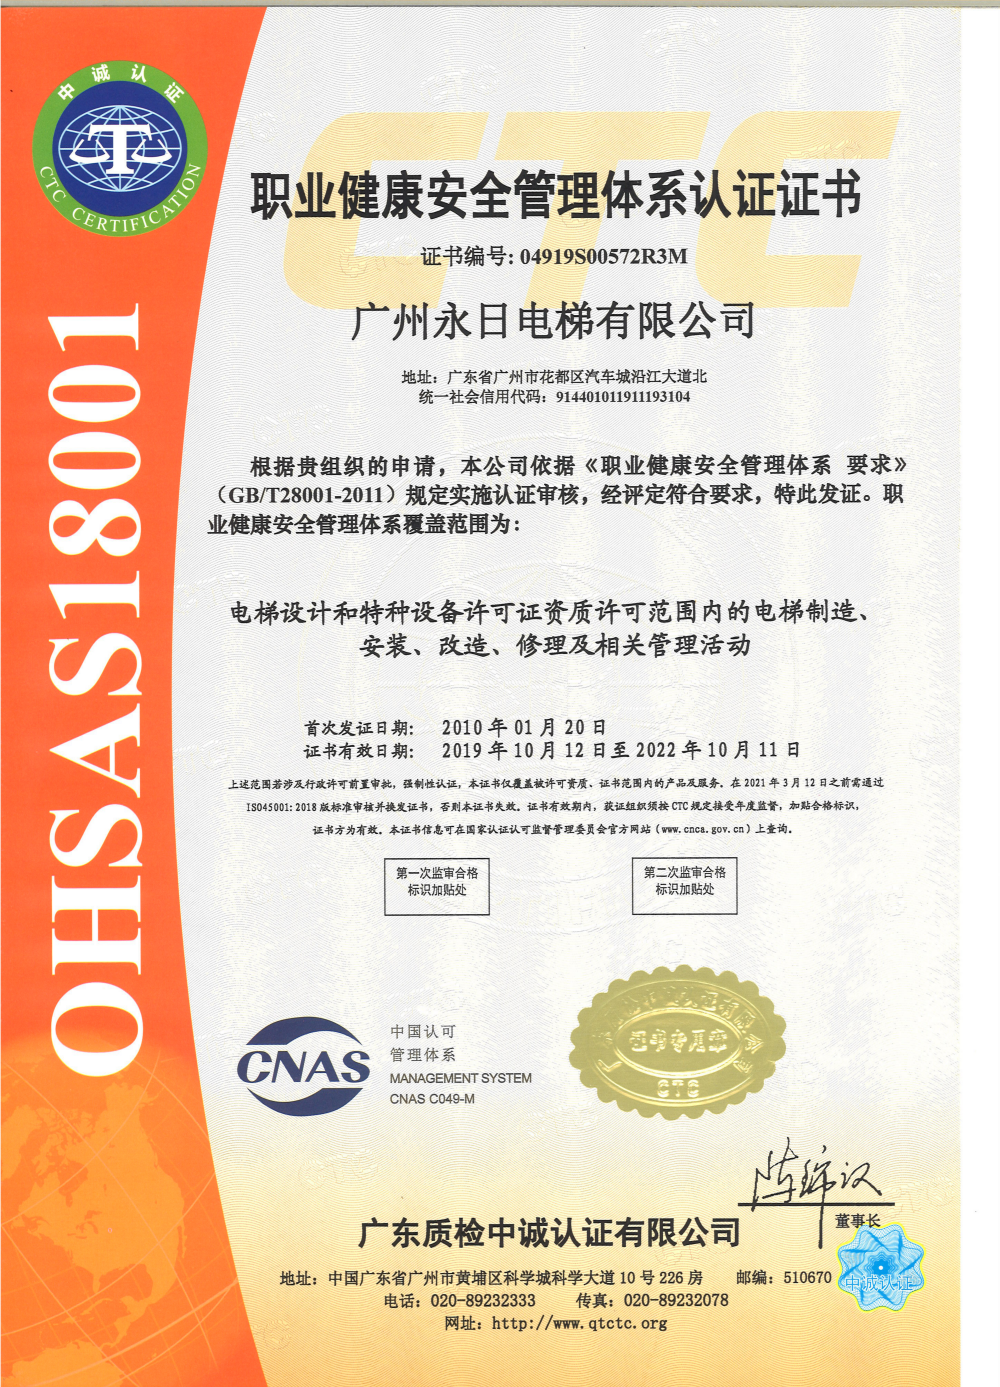 OHSMS18001 certification